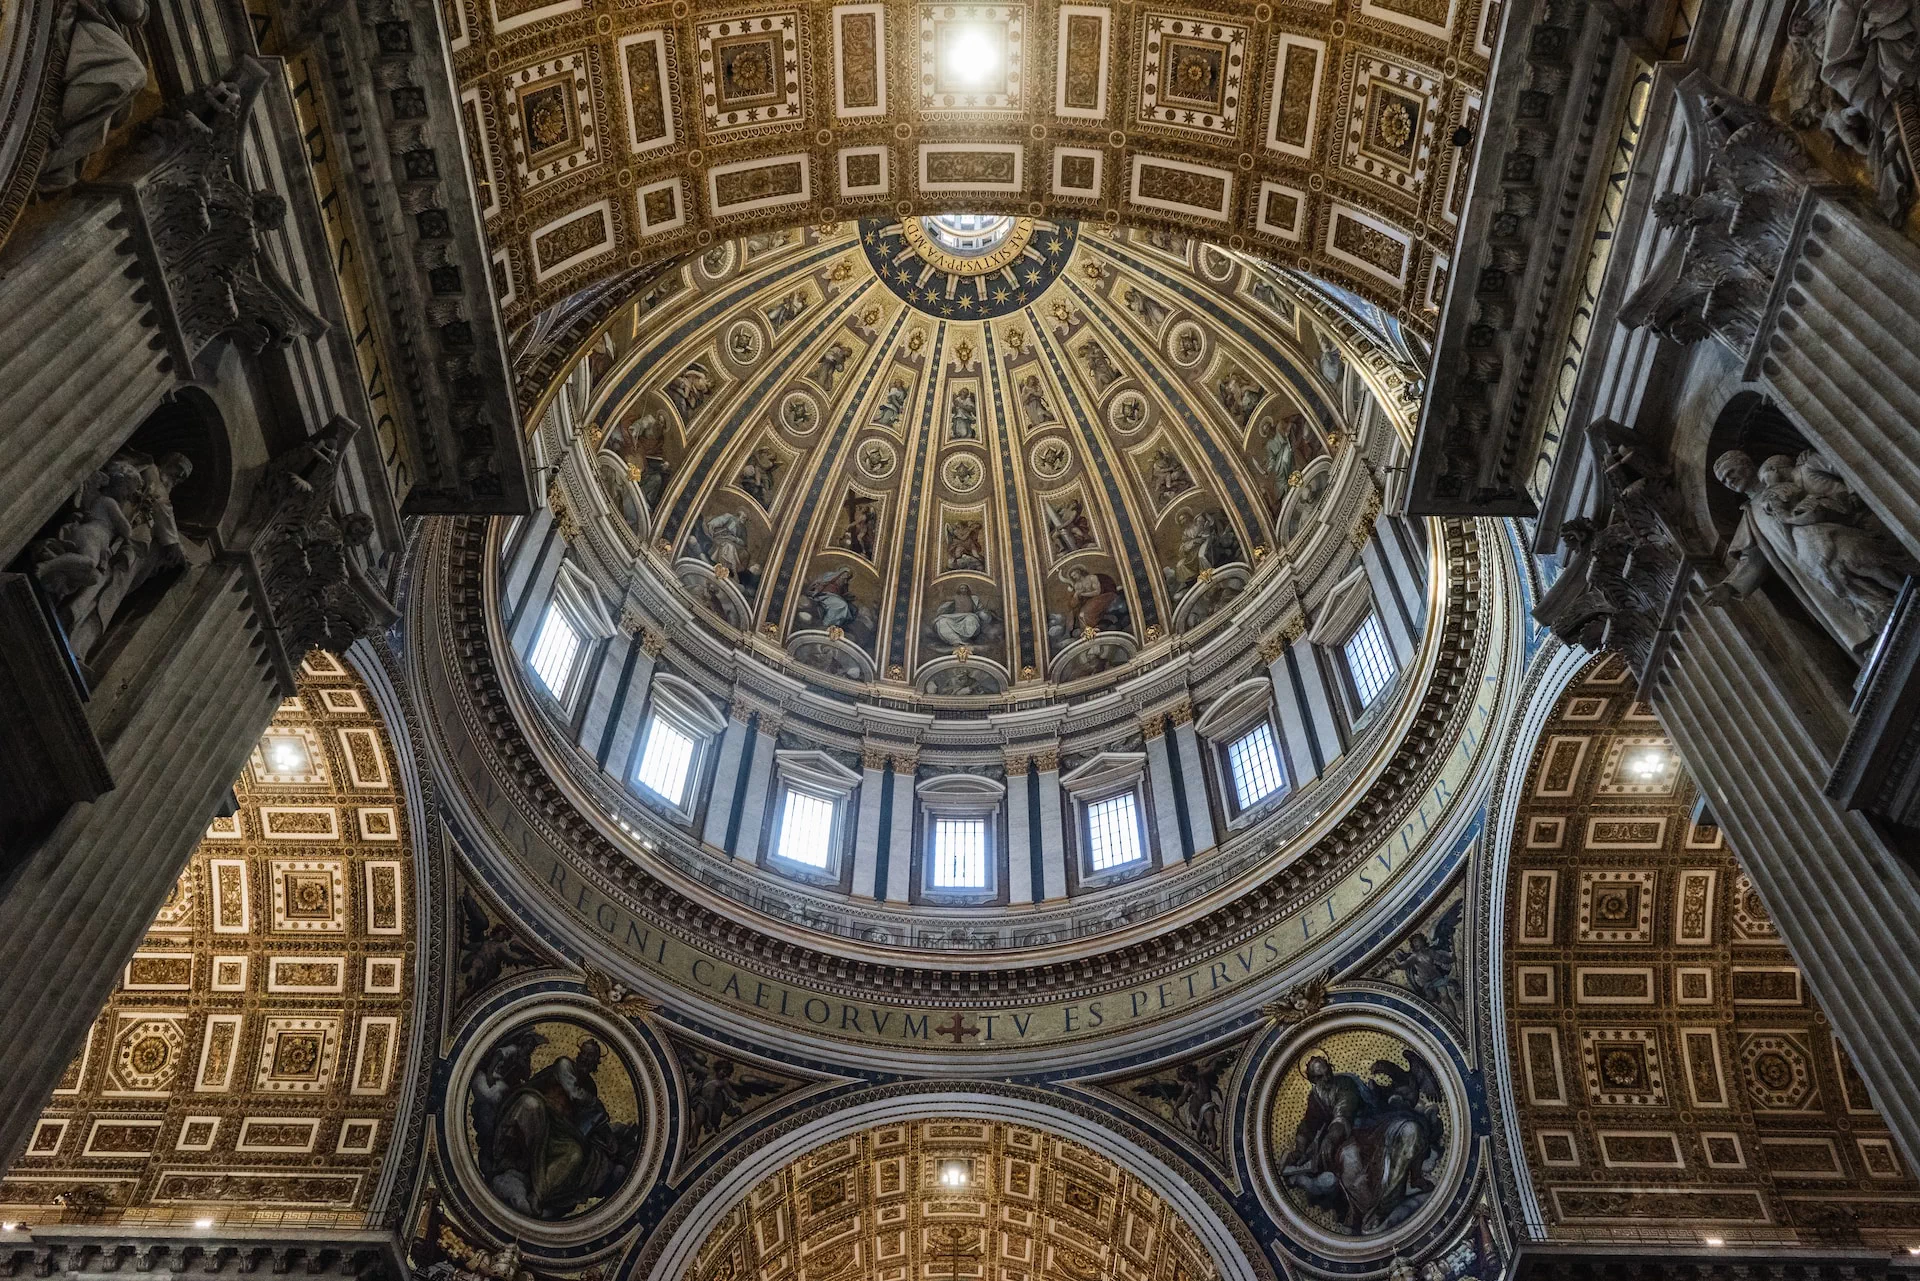 Standing beneath St. Peter’s dome in Rome is one of Europe’s great spiritual experiences